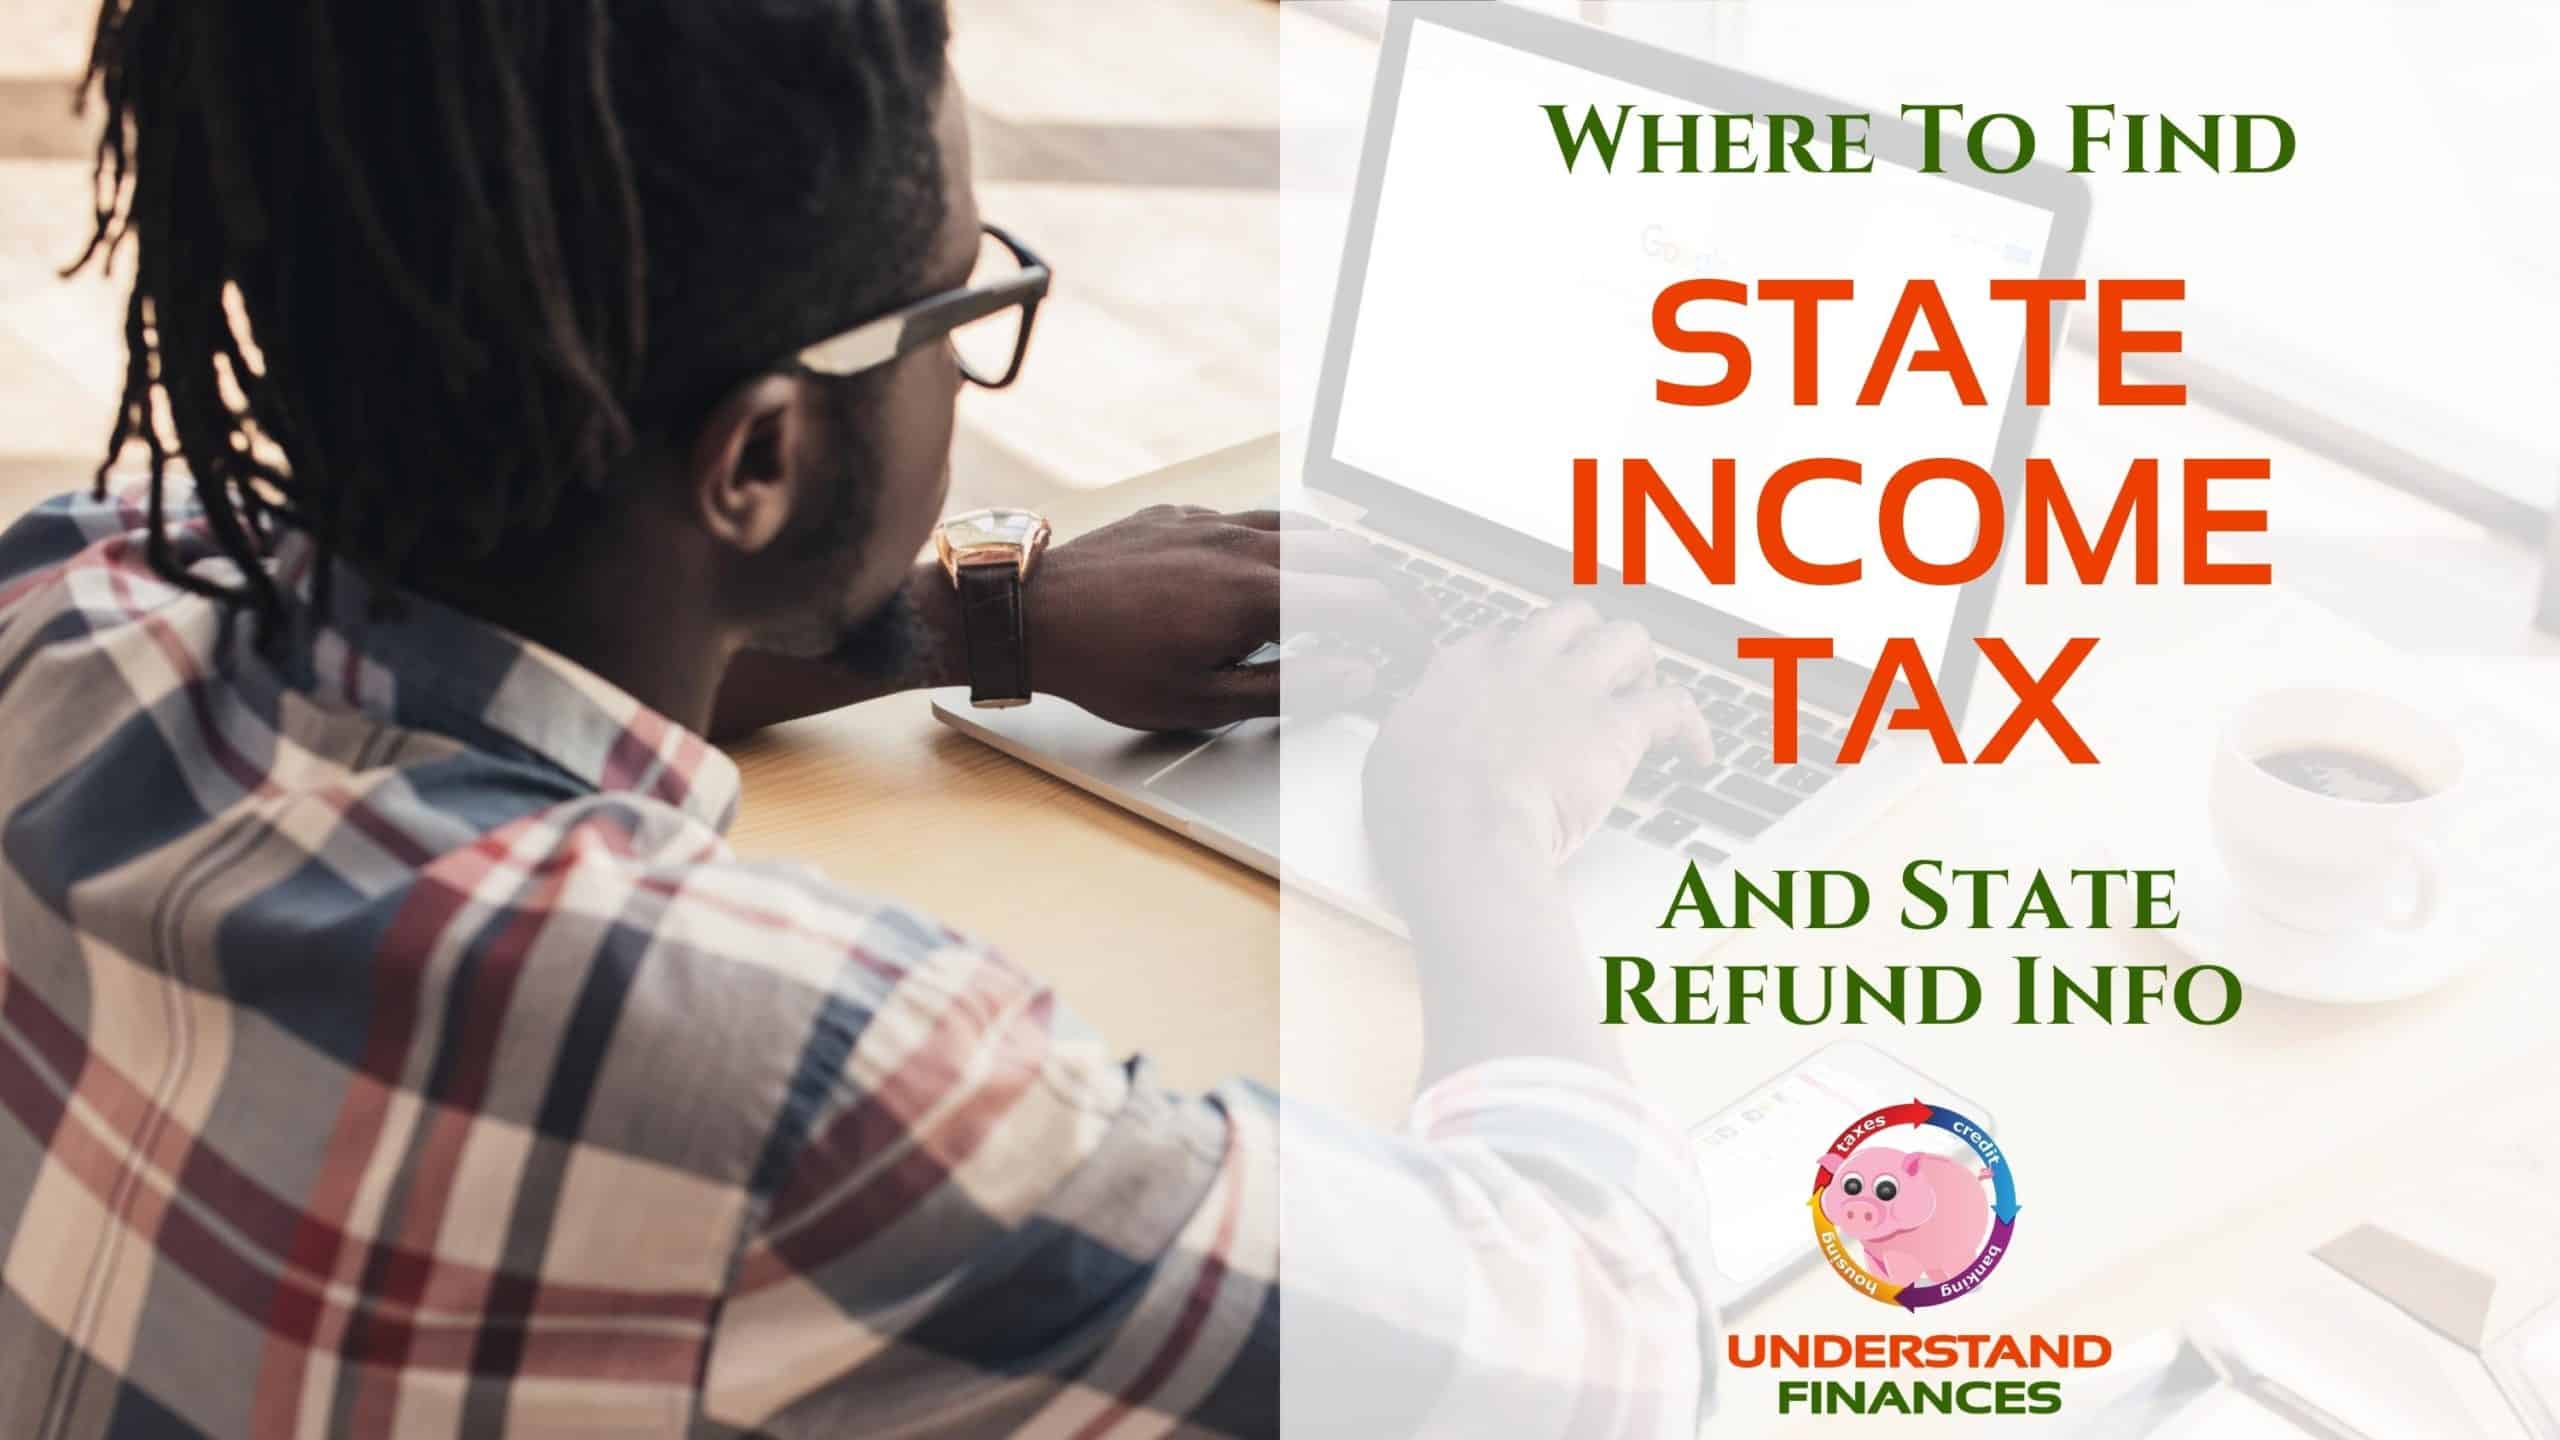 Where To Find State Income Tax & State Refund Info